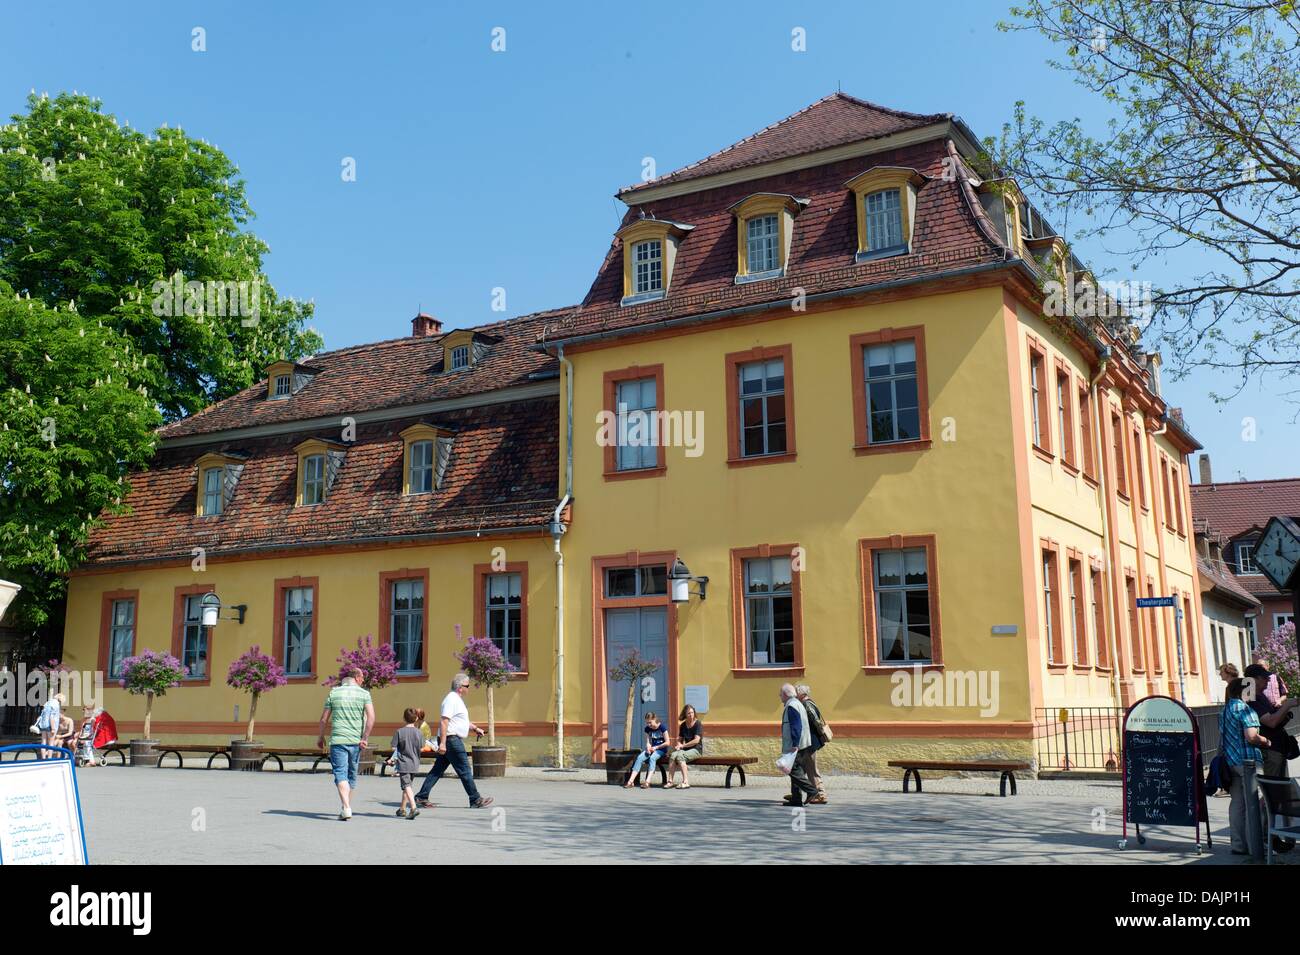 Tourists and passers-by stroll past the Wittumspalais in Weimar, Germany, 22 April 2011. Anna Amalia, Duchess of Saxe-Weimar-Eisenach, purchased the estate and property in 1774 and used it as her retirement seat and widow residence after the death of her husband Ernst August II Konstantin, Duke of Saxe-Weimar-Eisenach, in 1758. The fact that she was a widow gave the palace its name Stock Photo